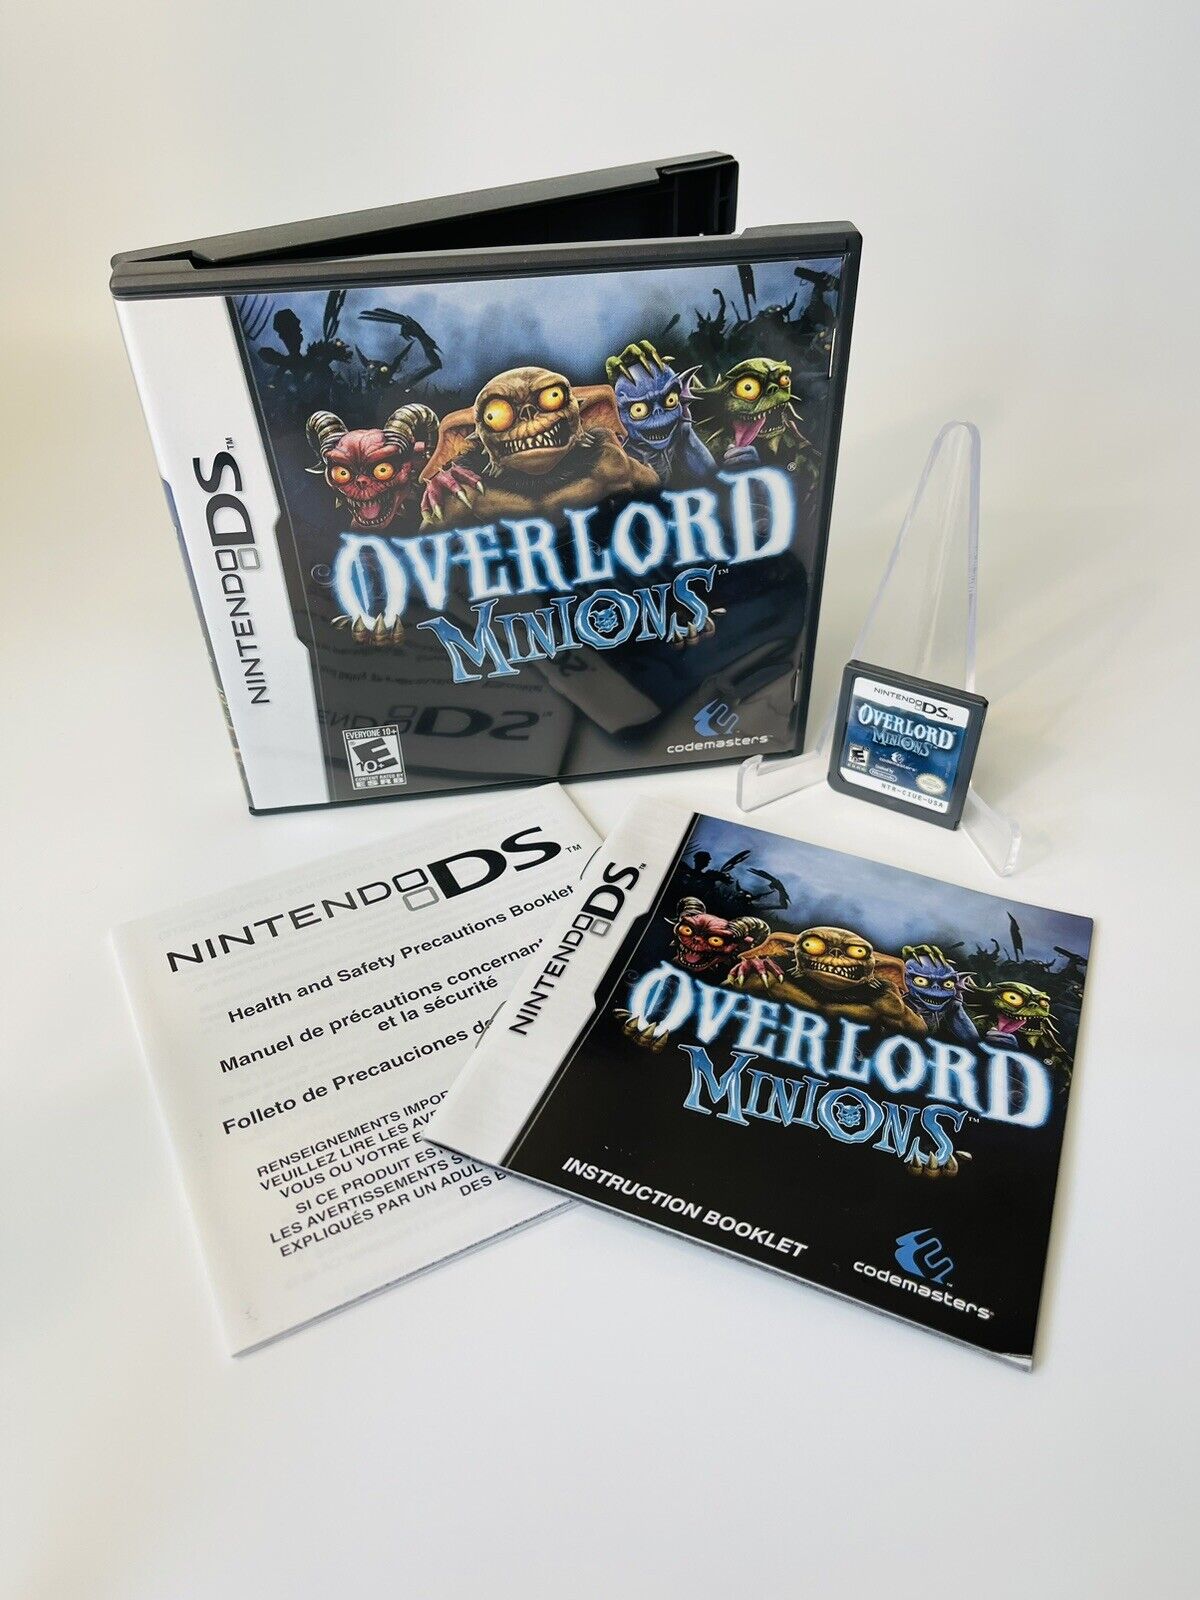 Overlord: Minions - Nintendo DS 3DS 2DS CIB Complete LOOKS UNUSED Condition Wow!